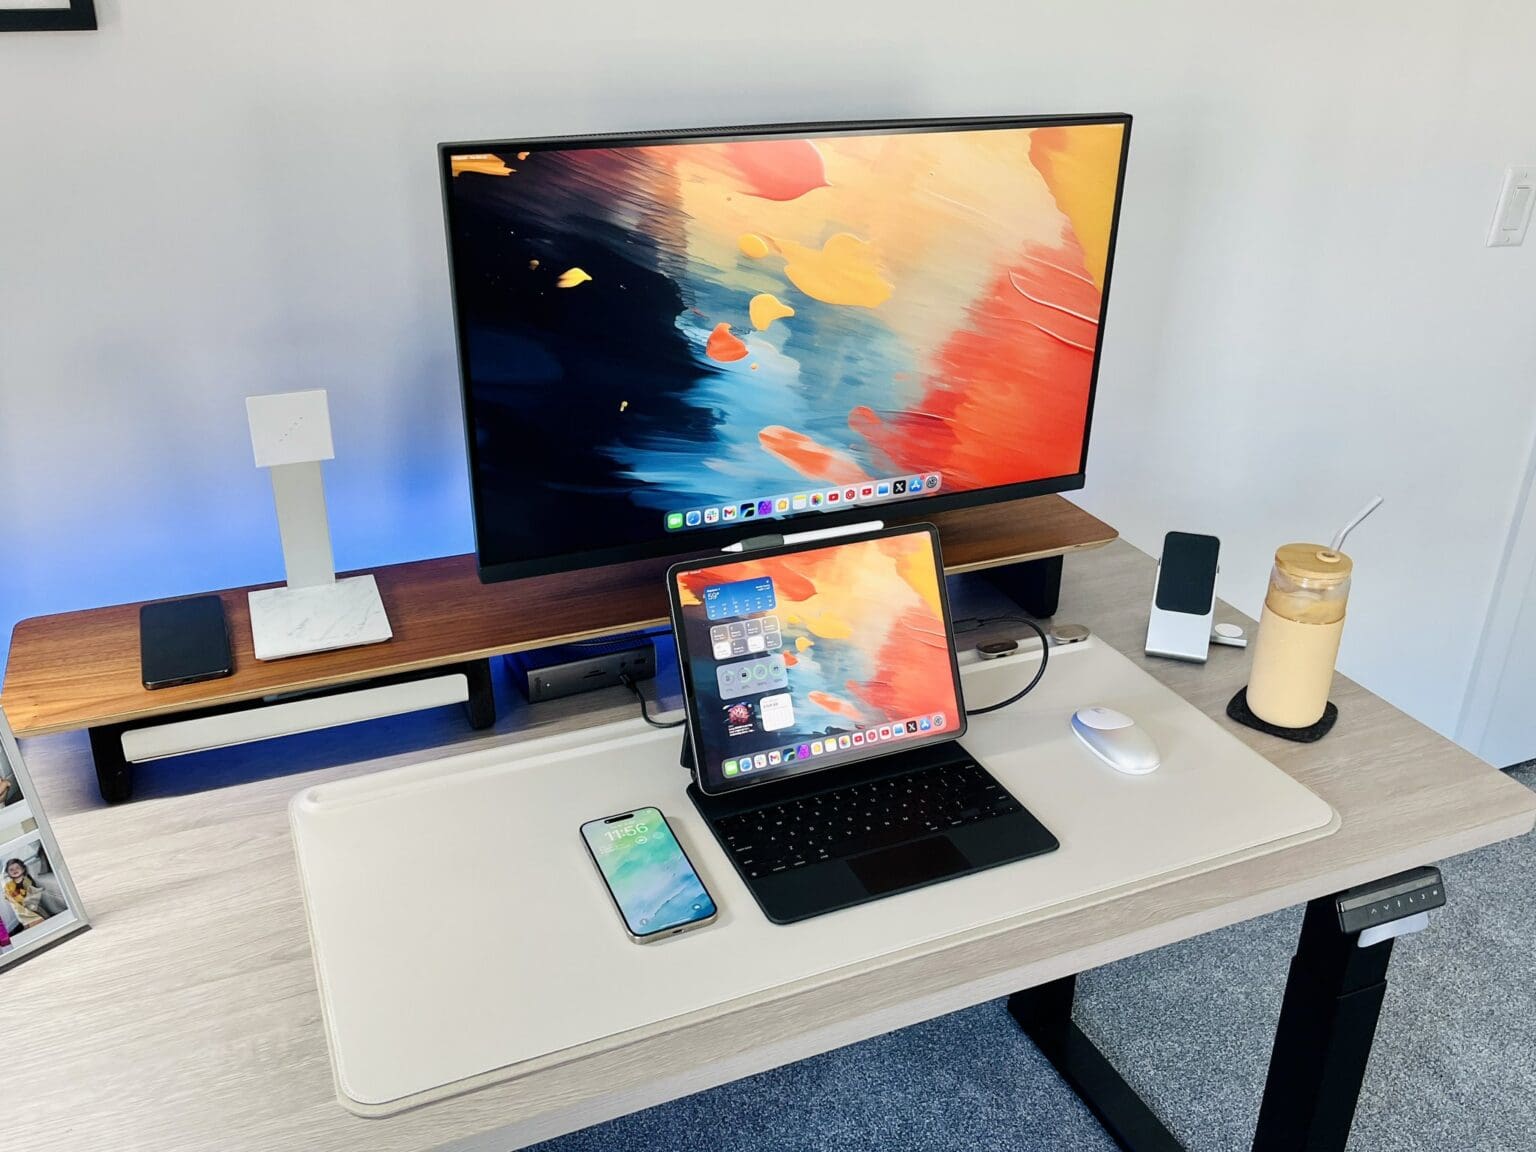 We don't feature a ton of iPad-driven setups, but that's not actually the cool thing we're obsessed with in this photo.